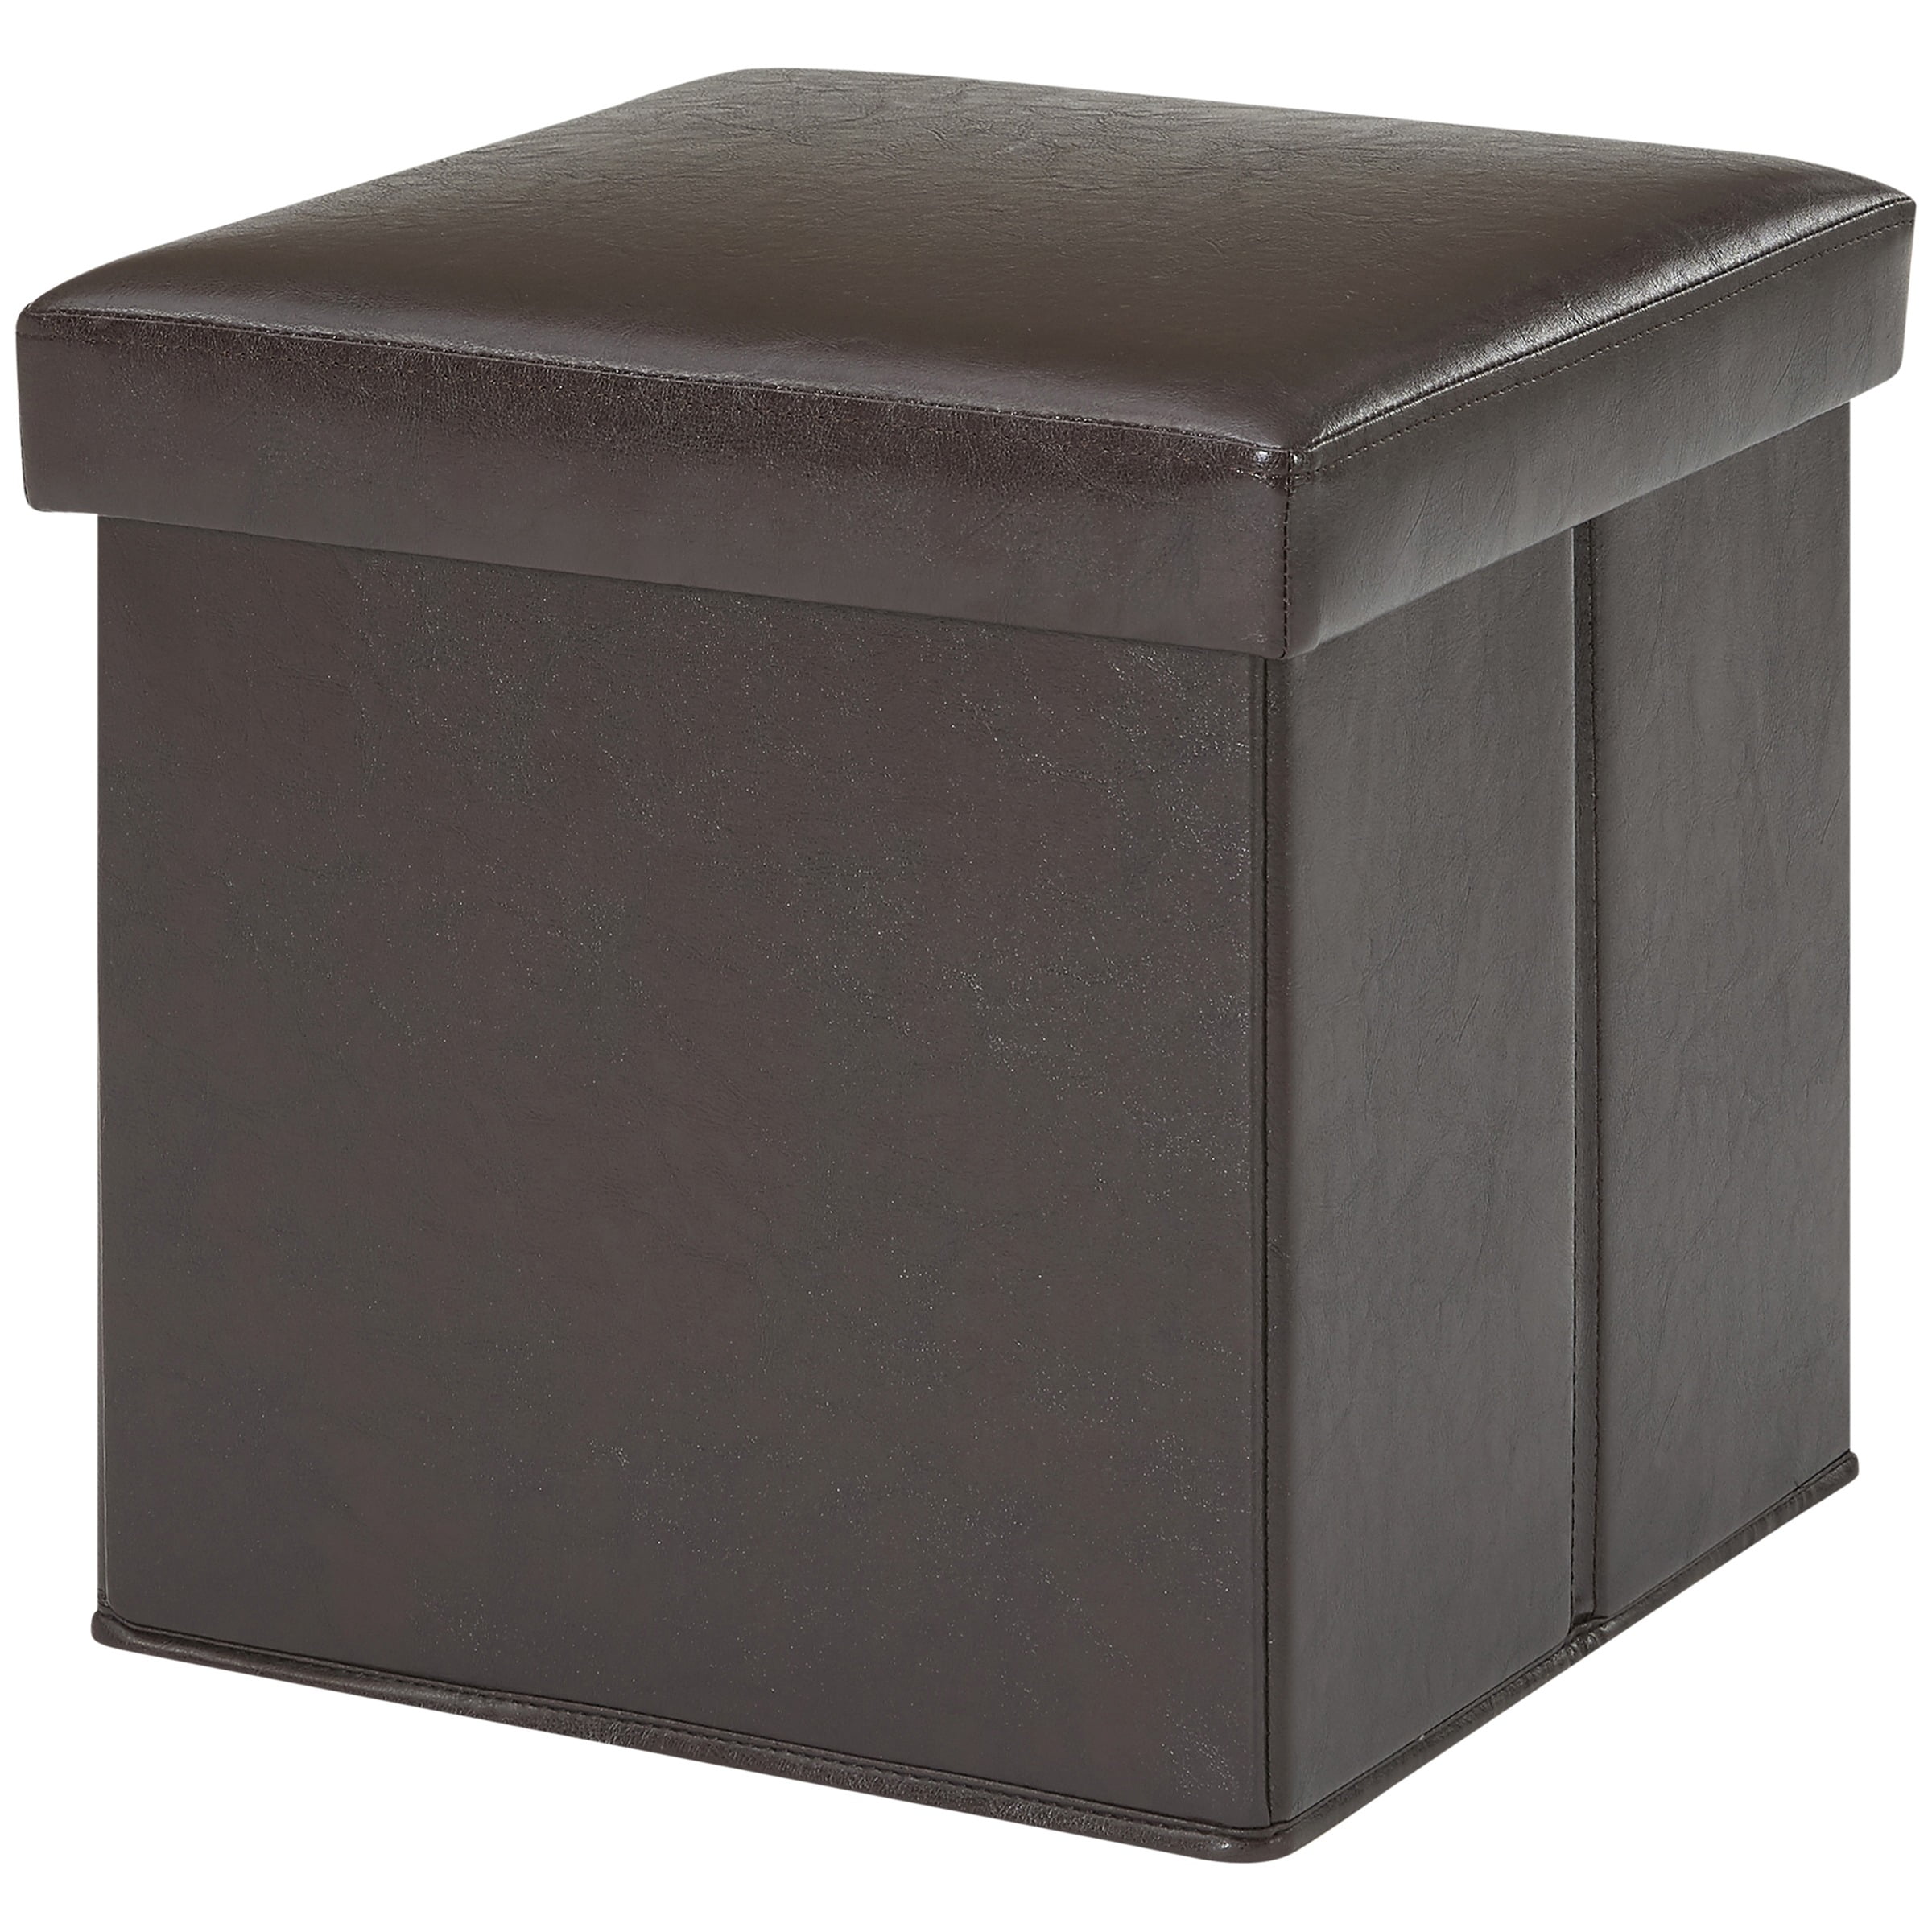 Mainstays Ultra Collapsible Storage, Round Brown Faux Leather Storage Ottoman